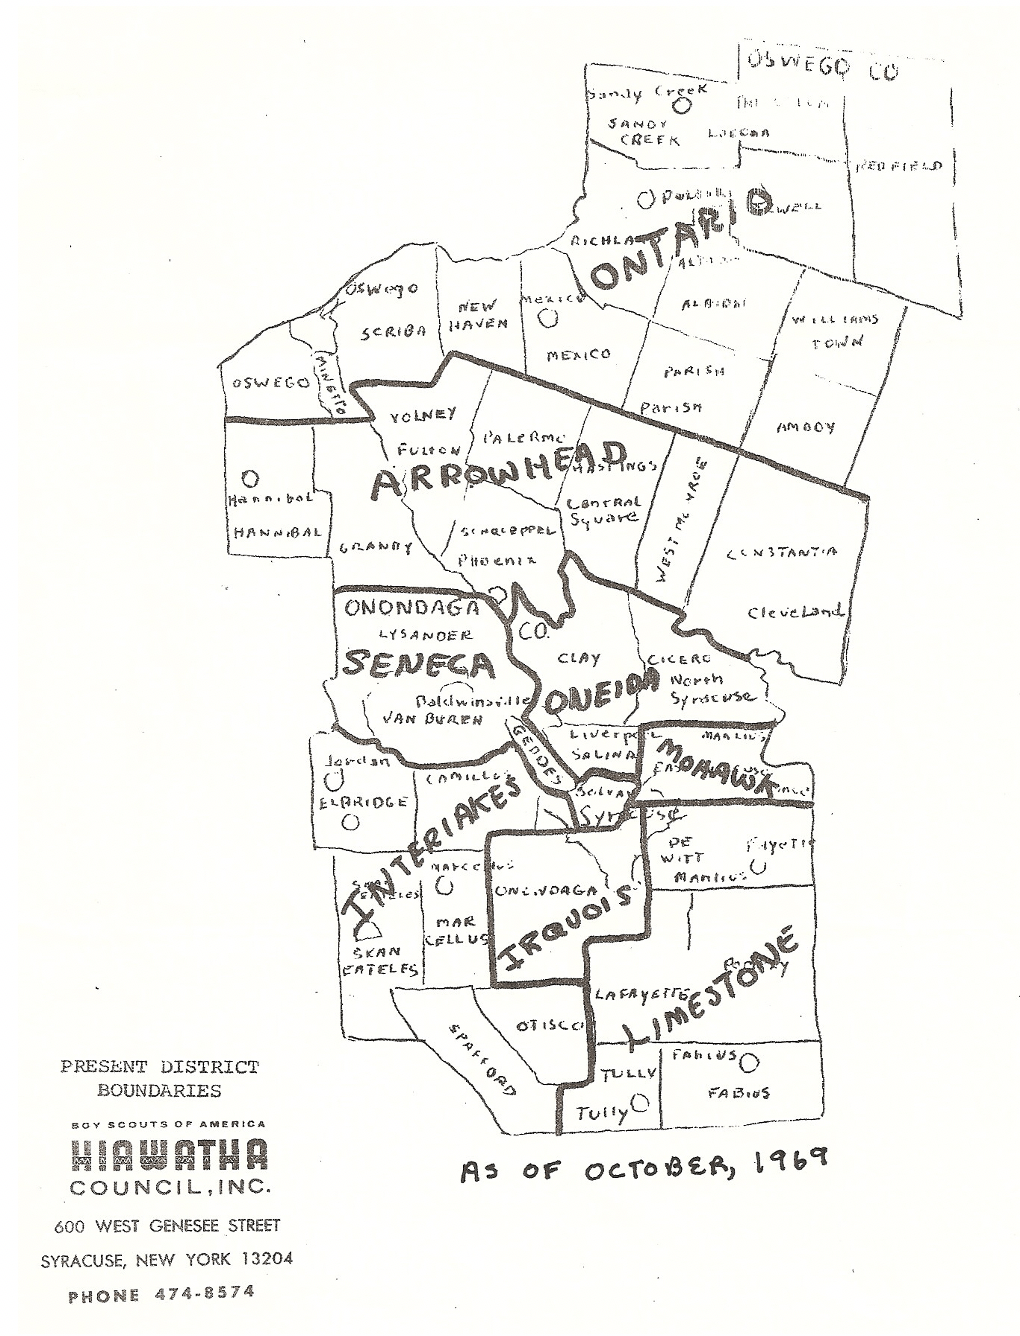 A diagram of the Hiawatha council district boundaries in October 1969